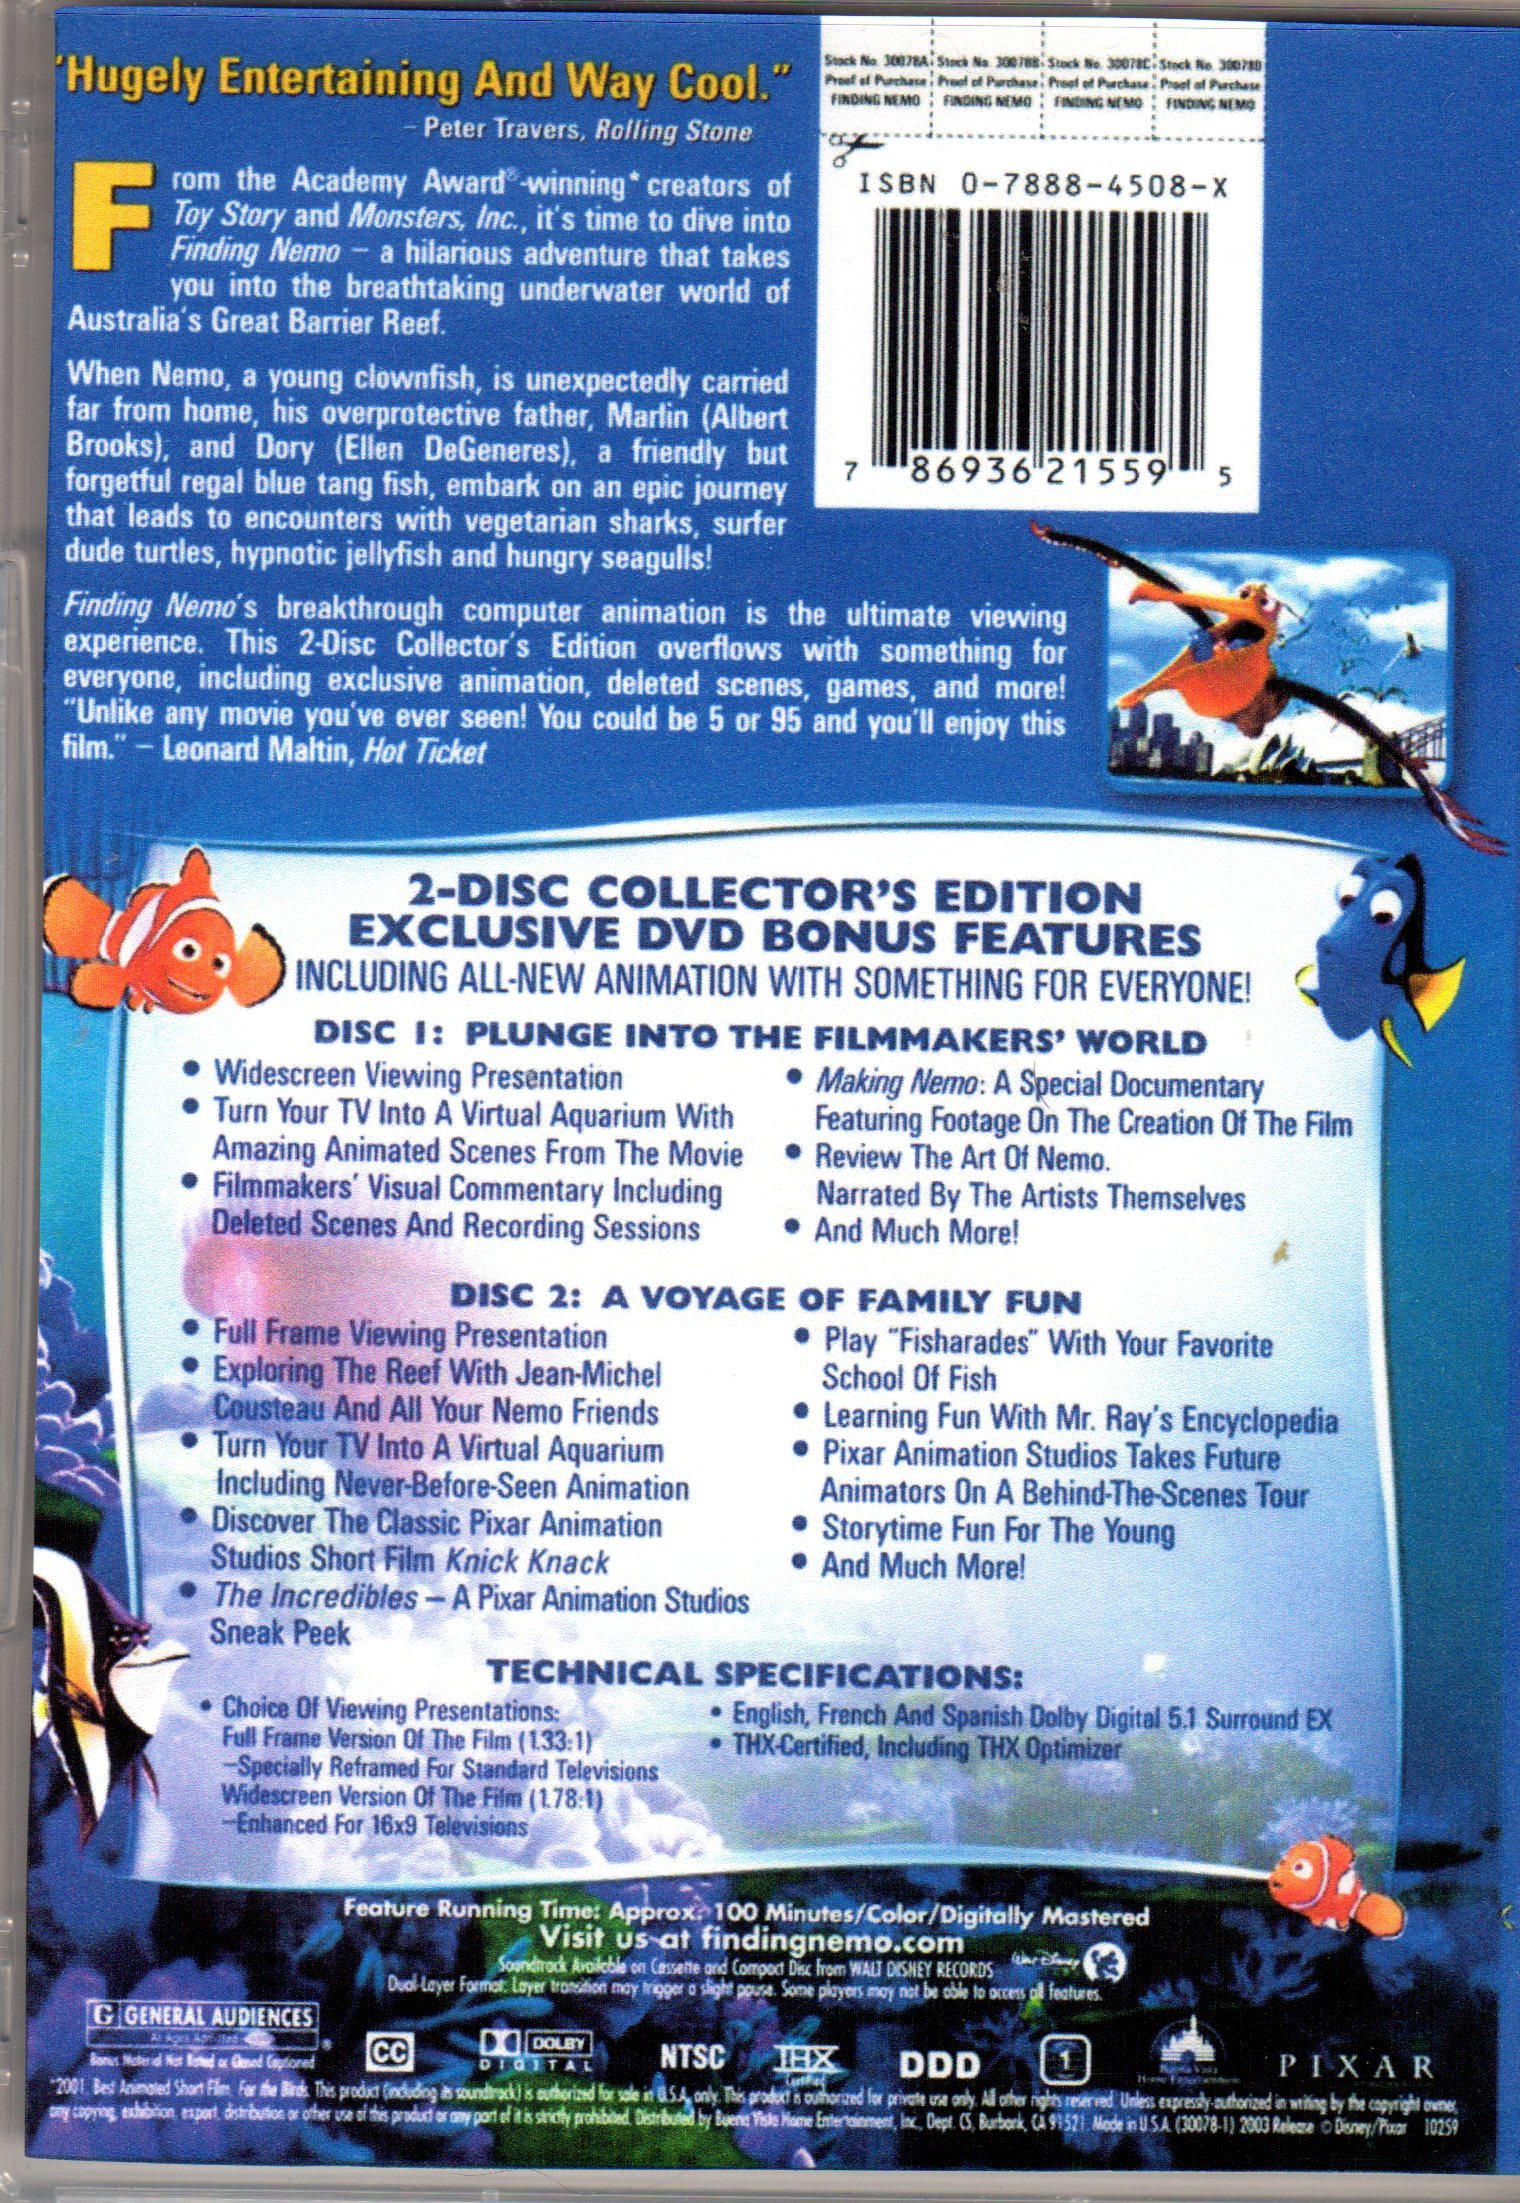 FINDING NEMO” DVD: A Walt Disney & Pixar's Animated. (2 DVD's) PRIVATE  COLLECTION. * 2 ITEMS MINIMUM FOR INTERNATIONAL ORDERS FROM USA. ONLY $  FEE PER ADDITIONAL ITEM SHIPPED. – Norberto Perdomo